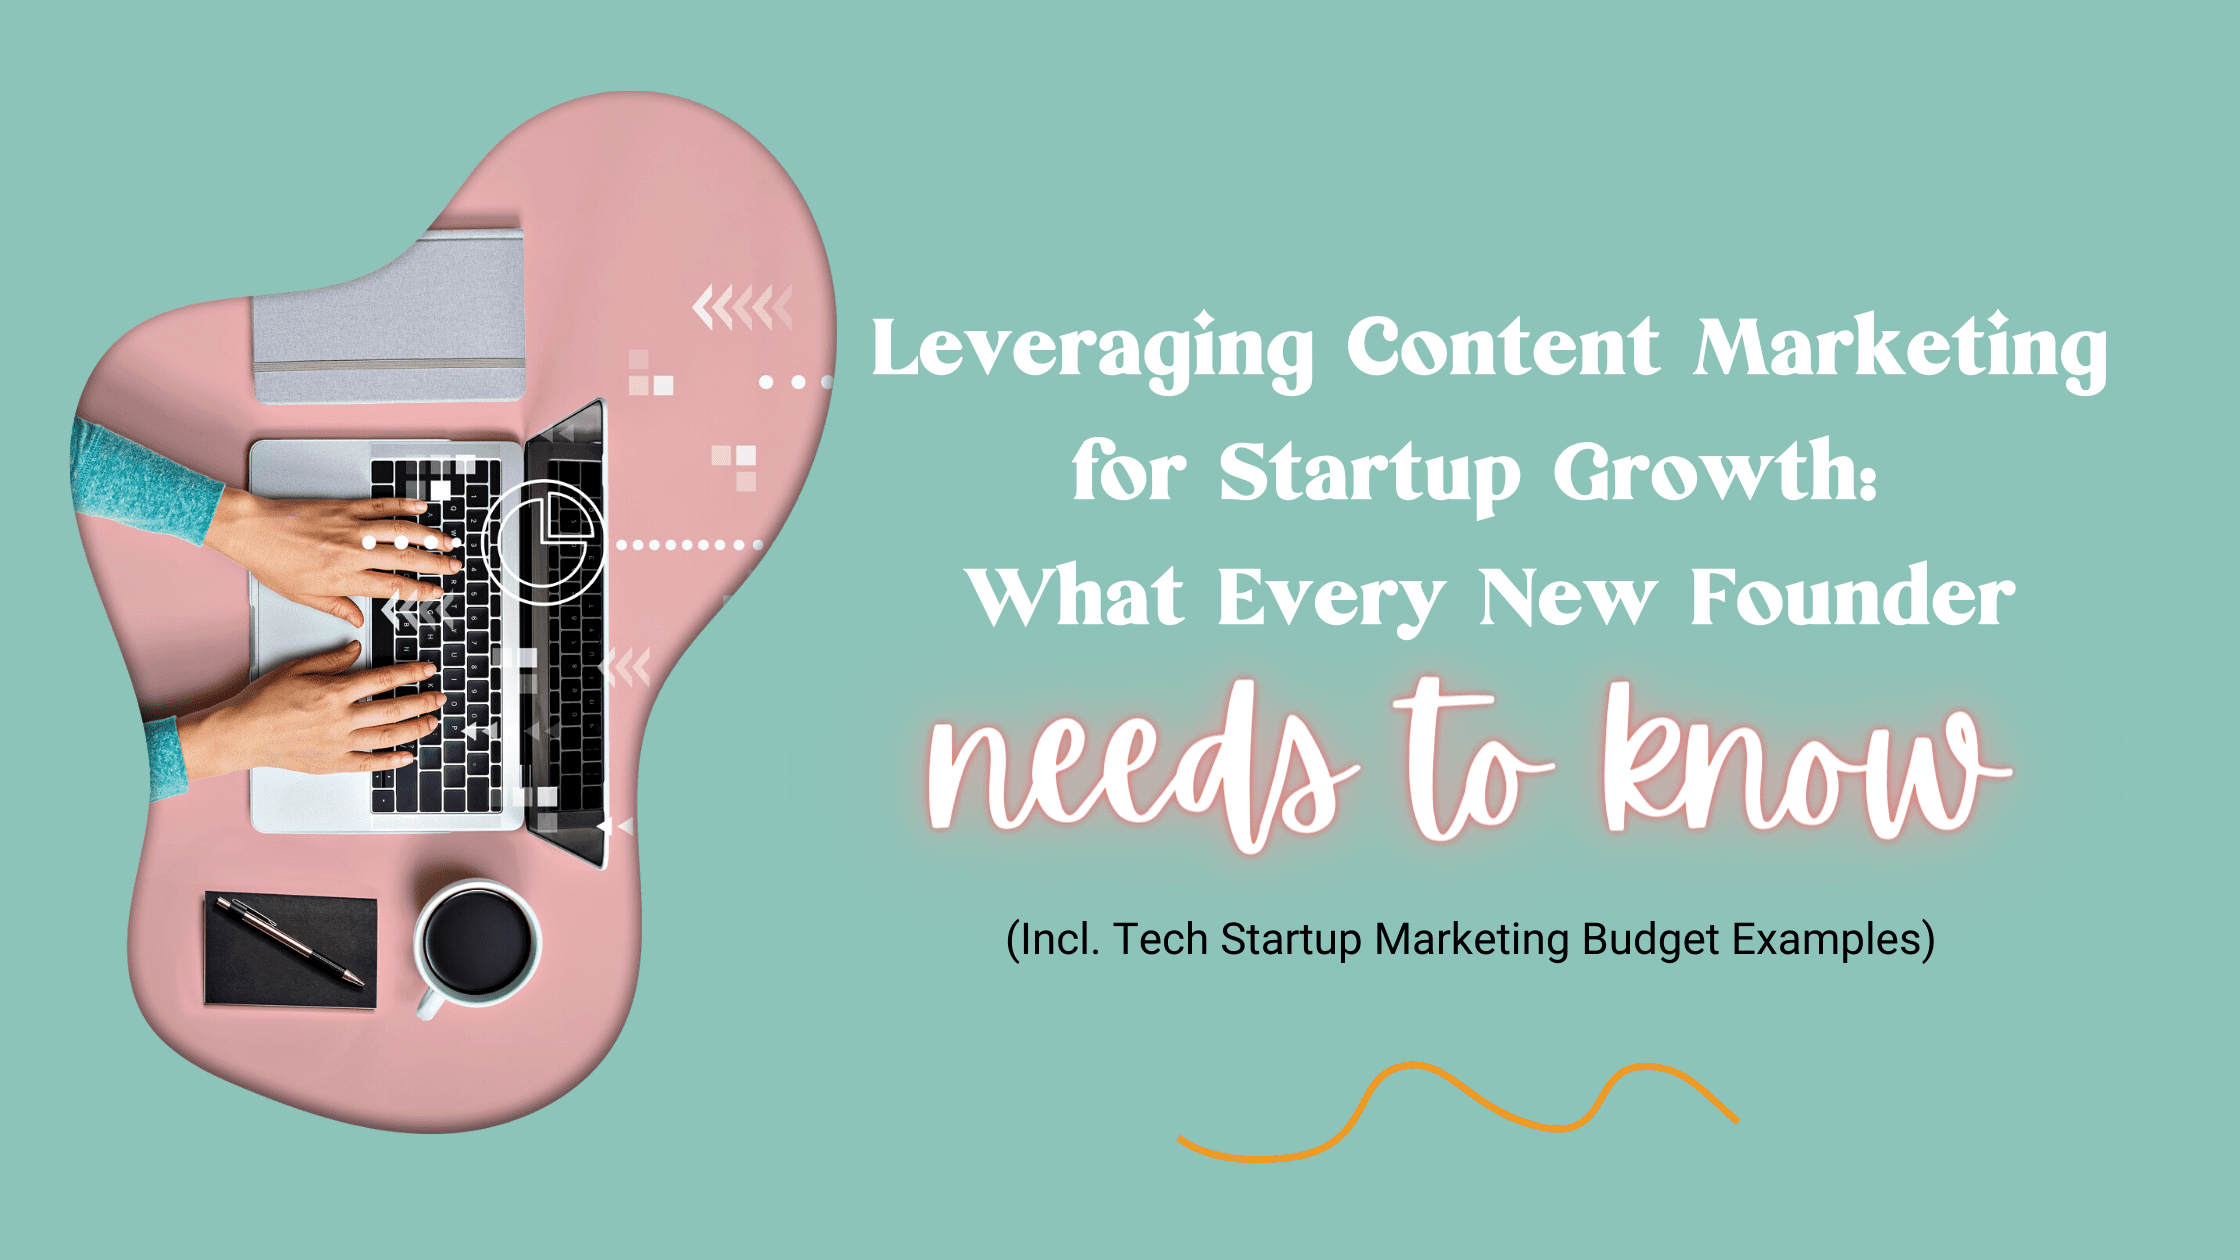 Content Marketing for Startup